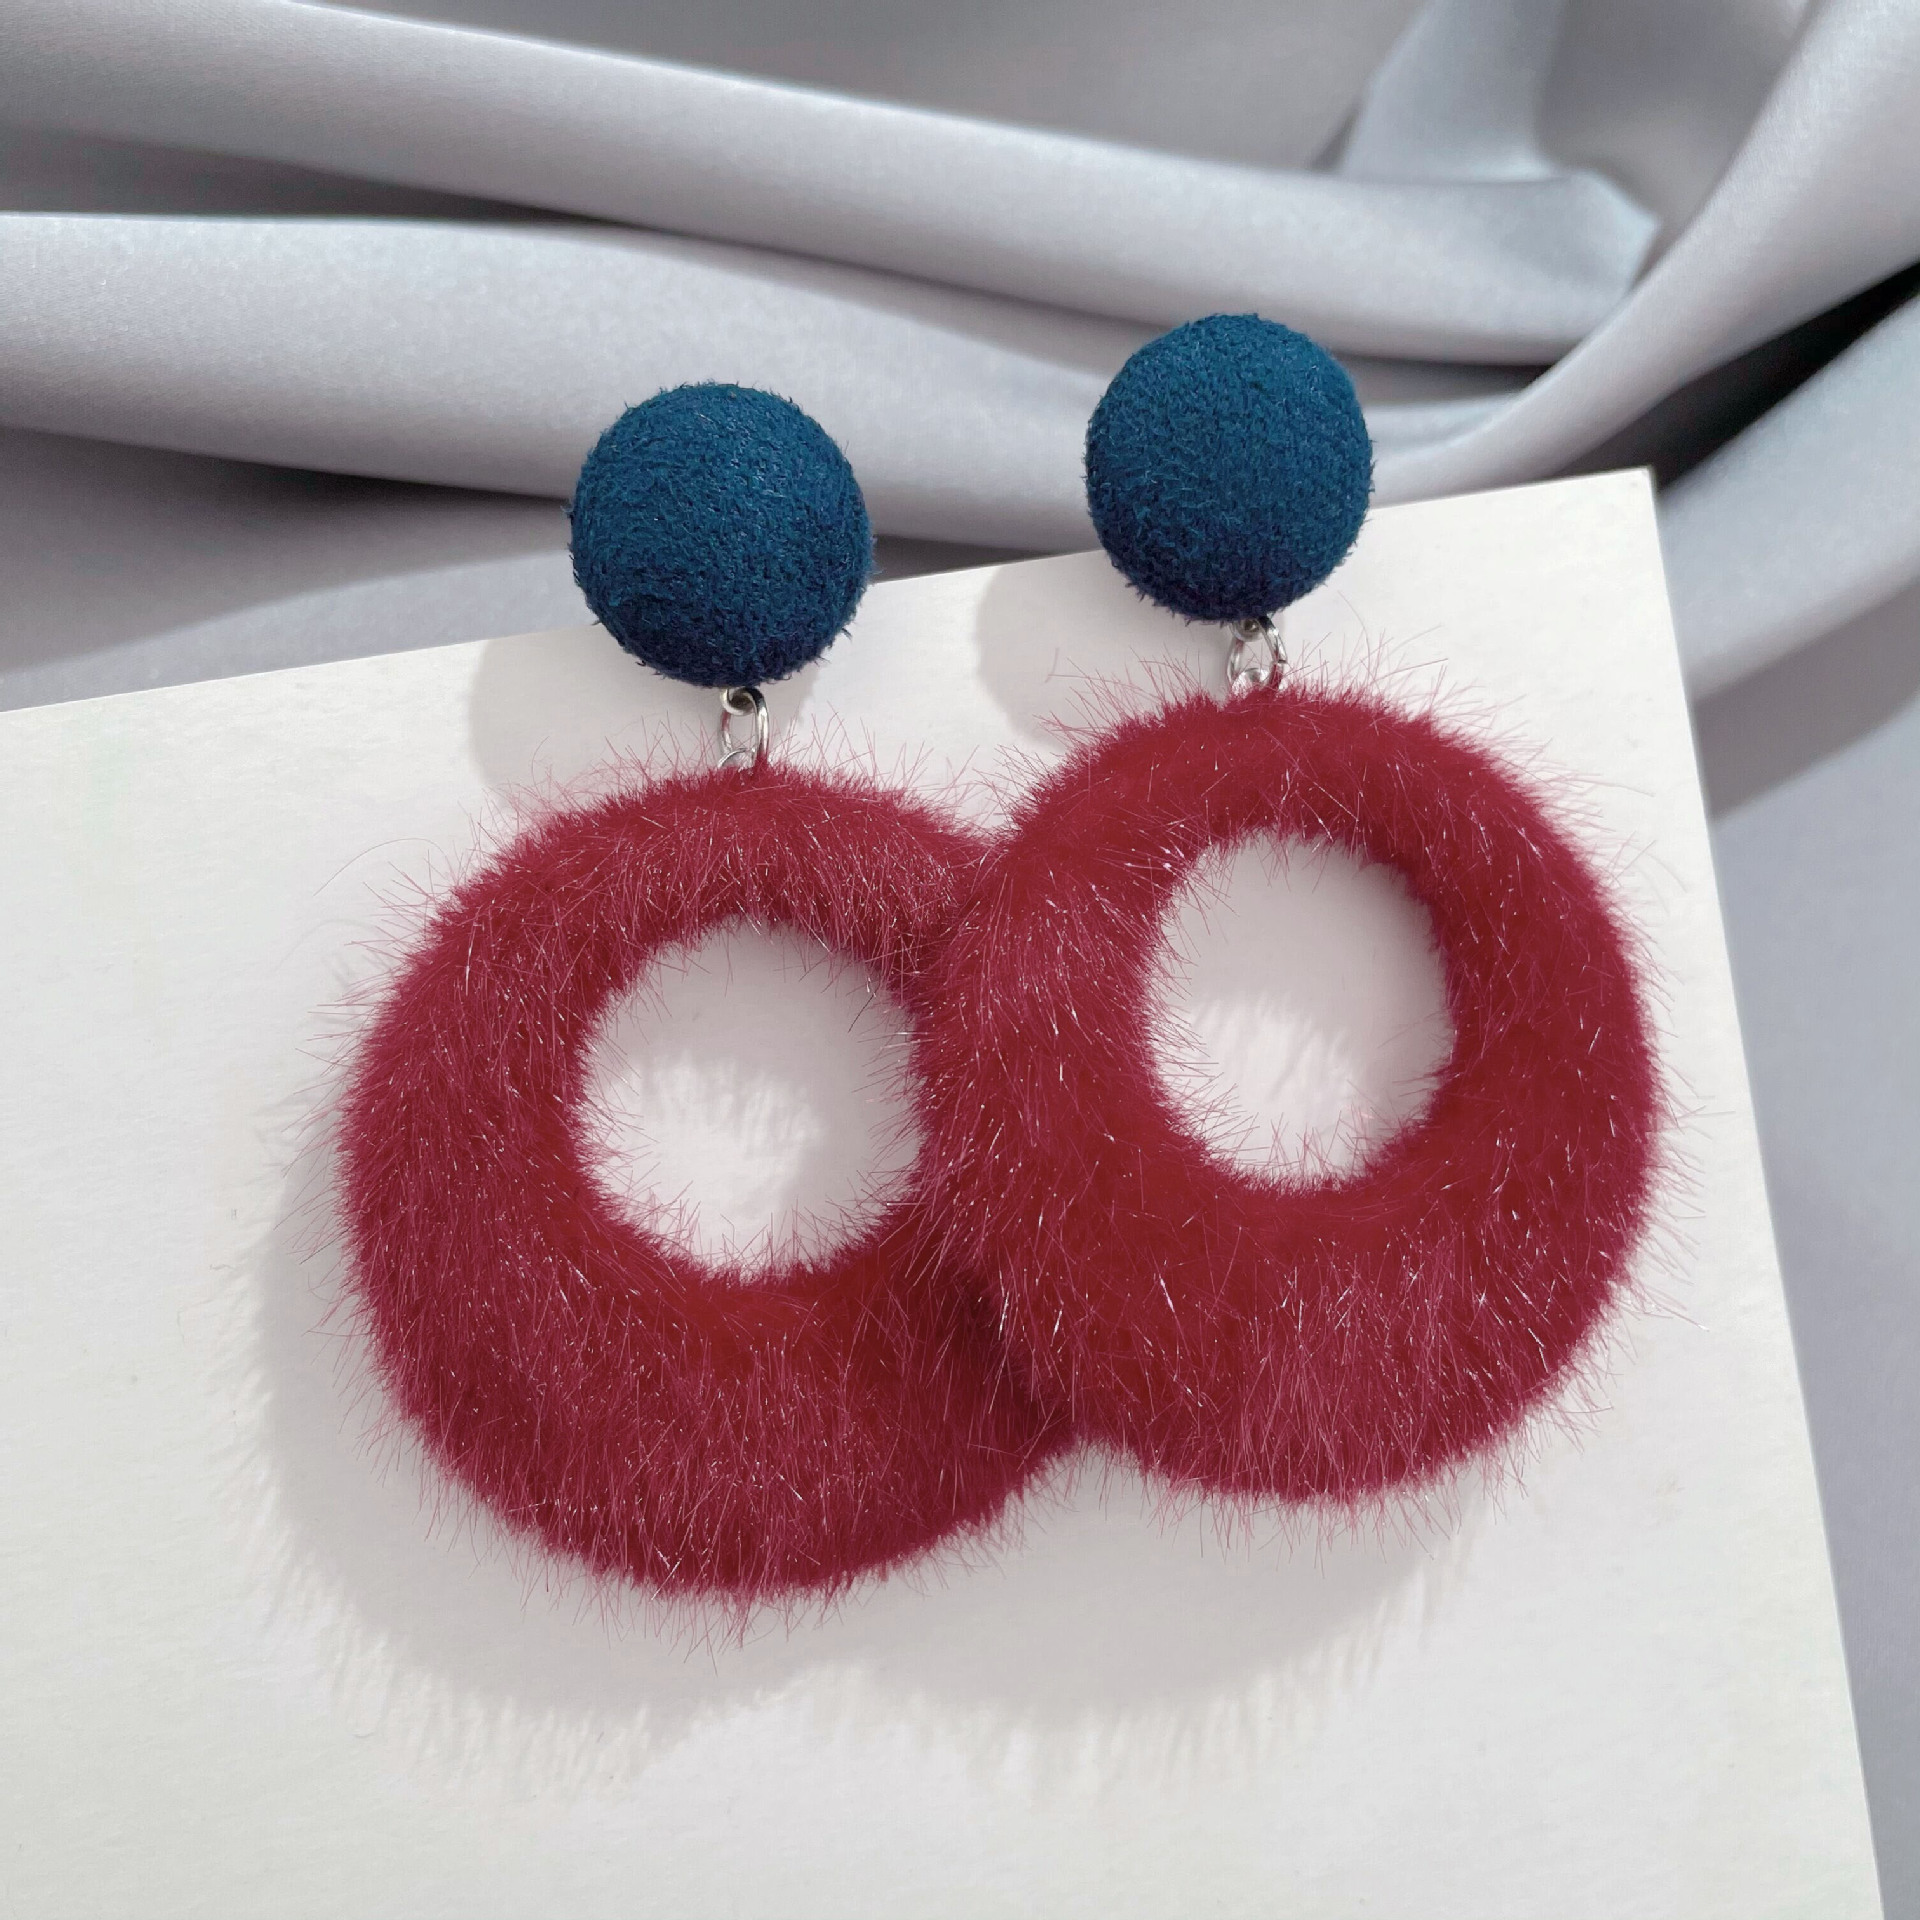 Tongfang Jewelry Earrings Korean Autumn and Winter Simplicity Vintage Plush Fabric Ring Earrings Temperament Wild Sweet Earringspicture5